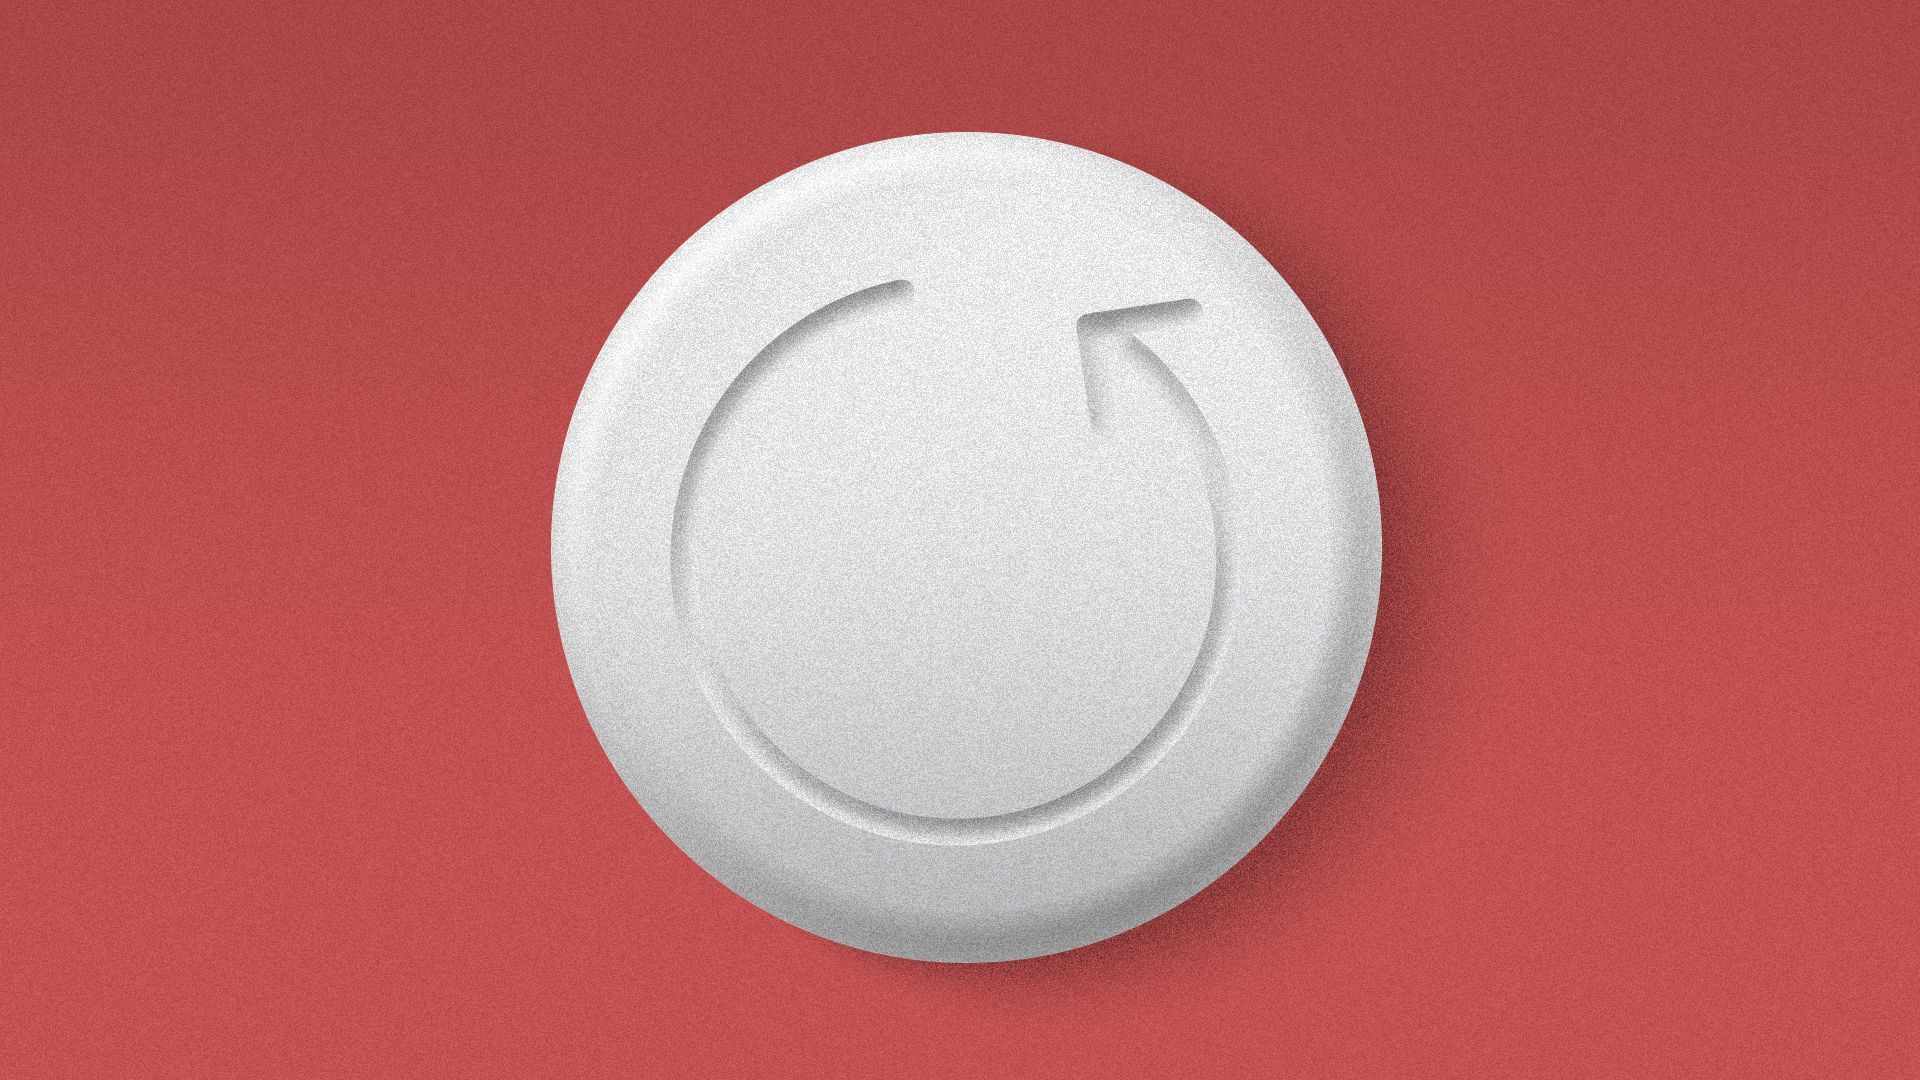 Illustration of a pill with a circular arrow on it. 